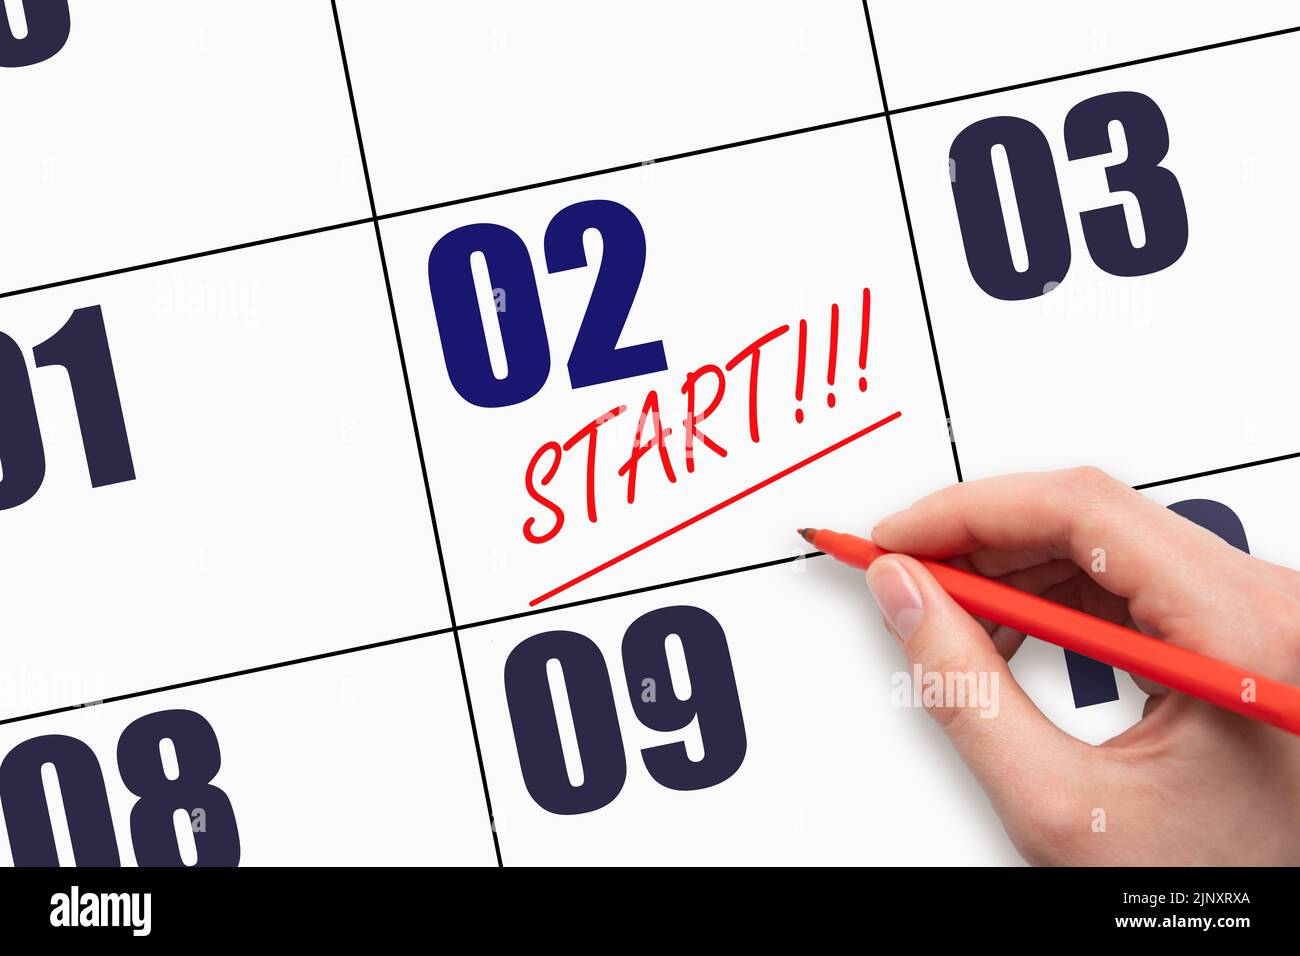 2nd day of the month. Hand writing text START and drawing a line on calendar date. Start Concept. The beginning of a new job. Business Challenge or do Stock Photo